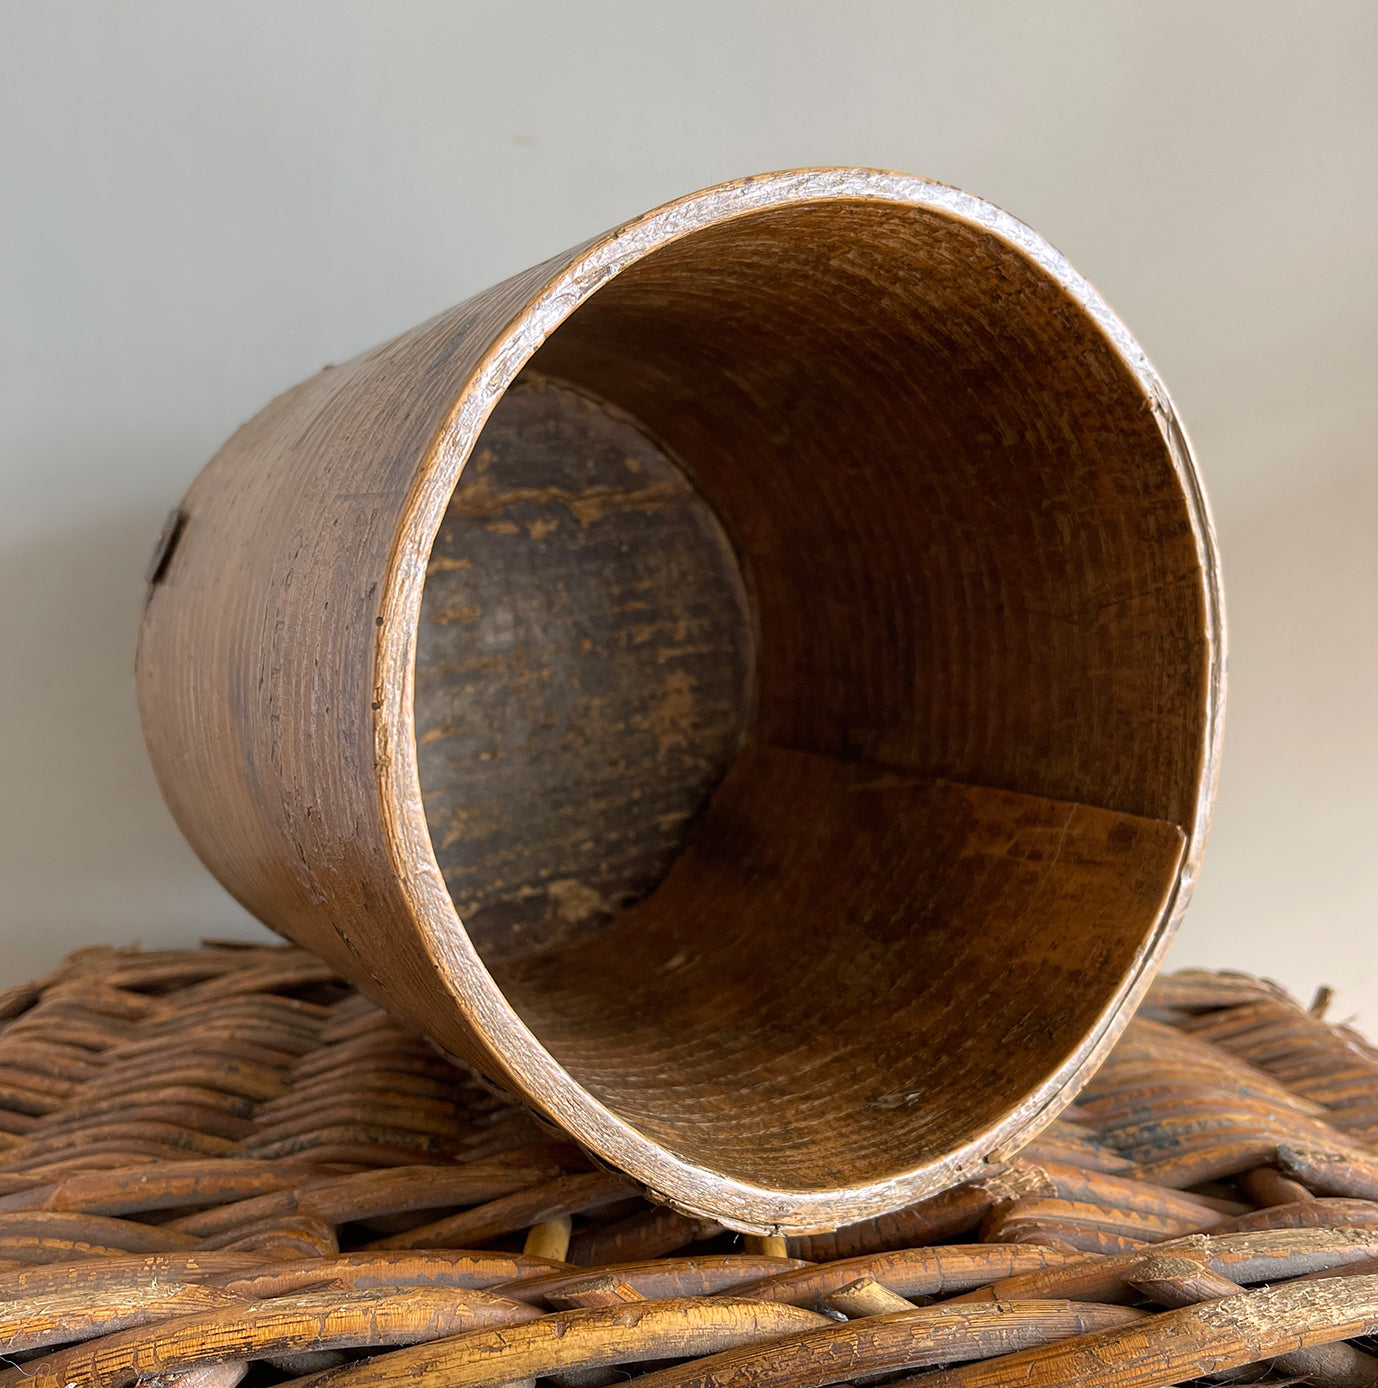 A Victorian Grain Measure. Constructed from yew wood with metal strapping. Marked with the Victorian Crown and the words 'Co LEICESTER' on the reverse